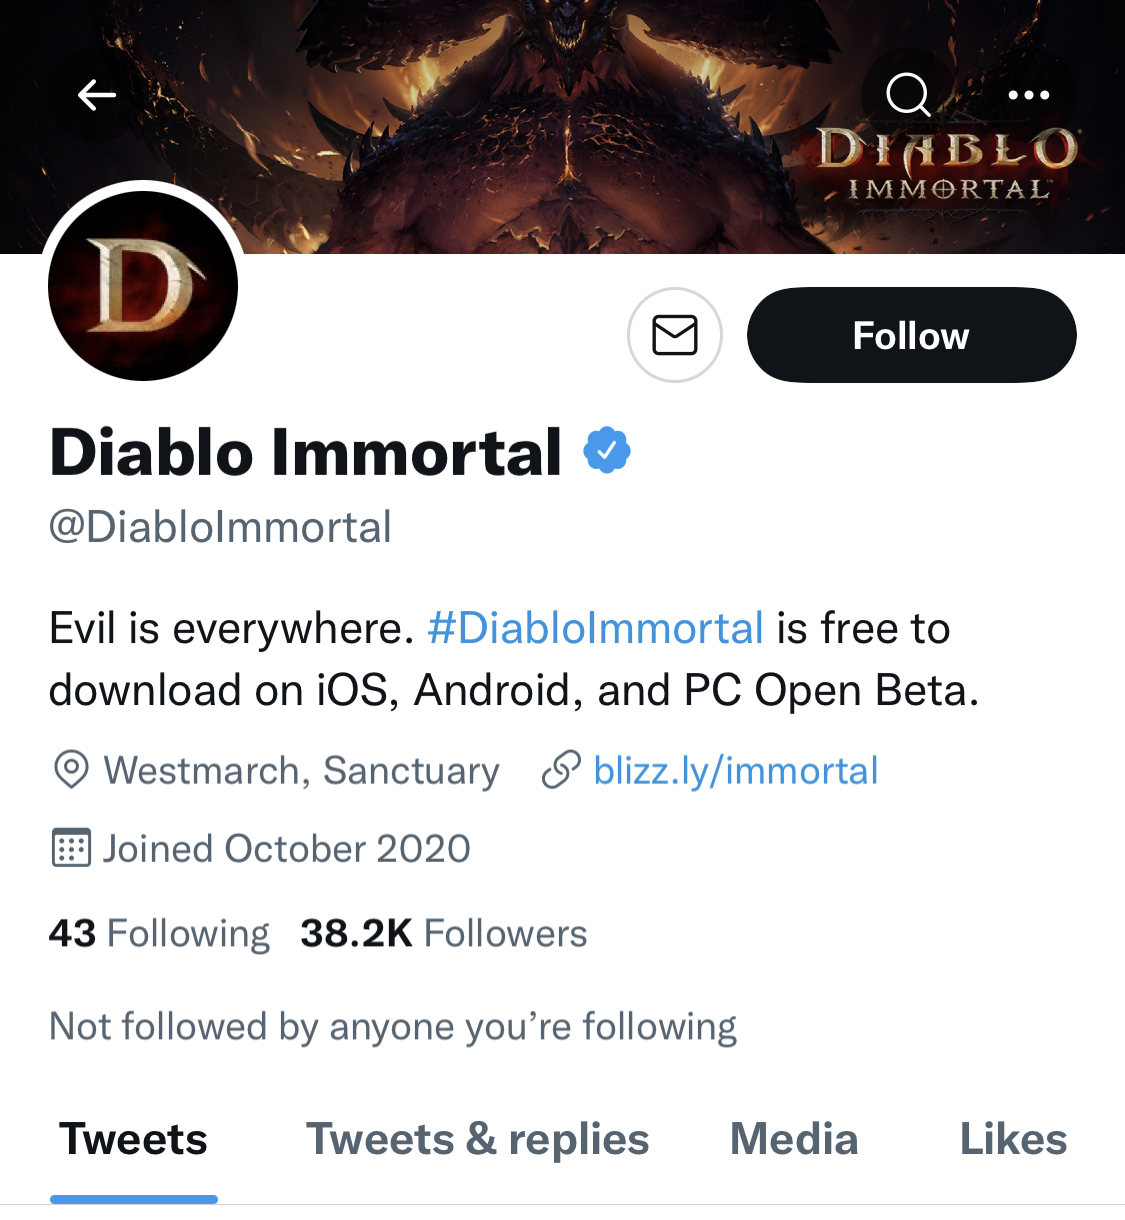 Diablo Immortal: Redeem Code List and Guide – WP Mobile Game Guides